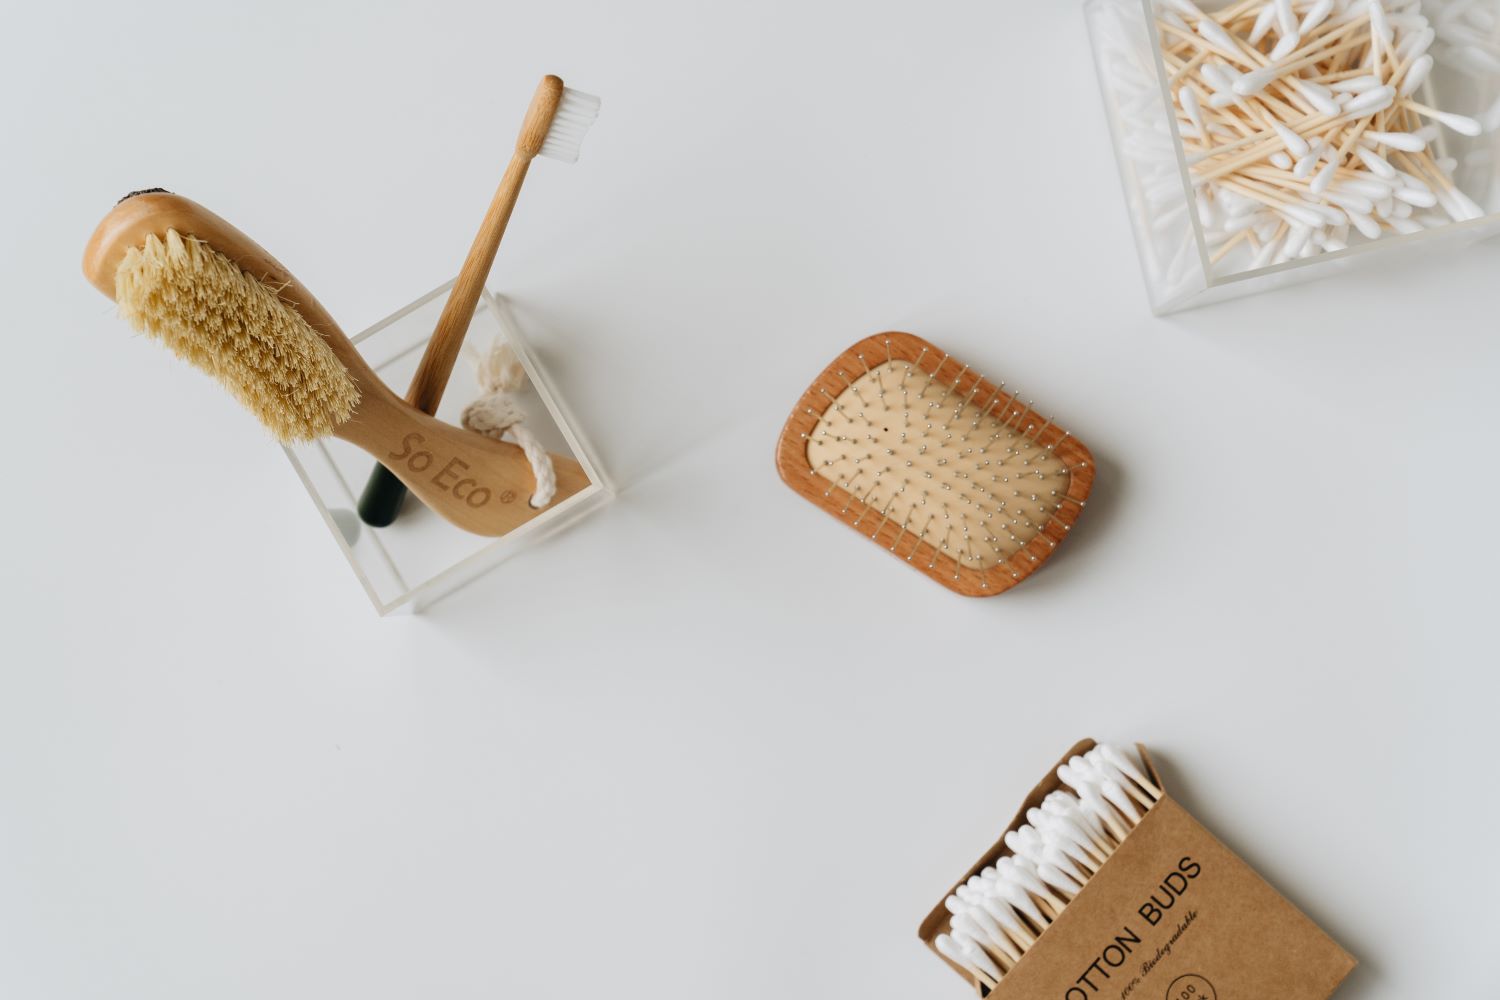 Bamboo Hygiene Products